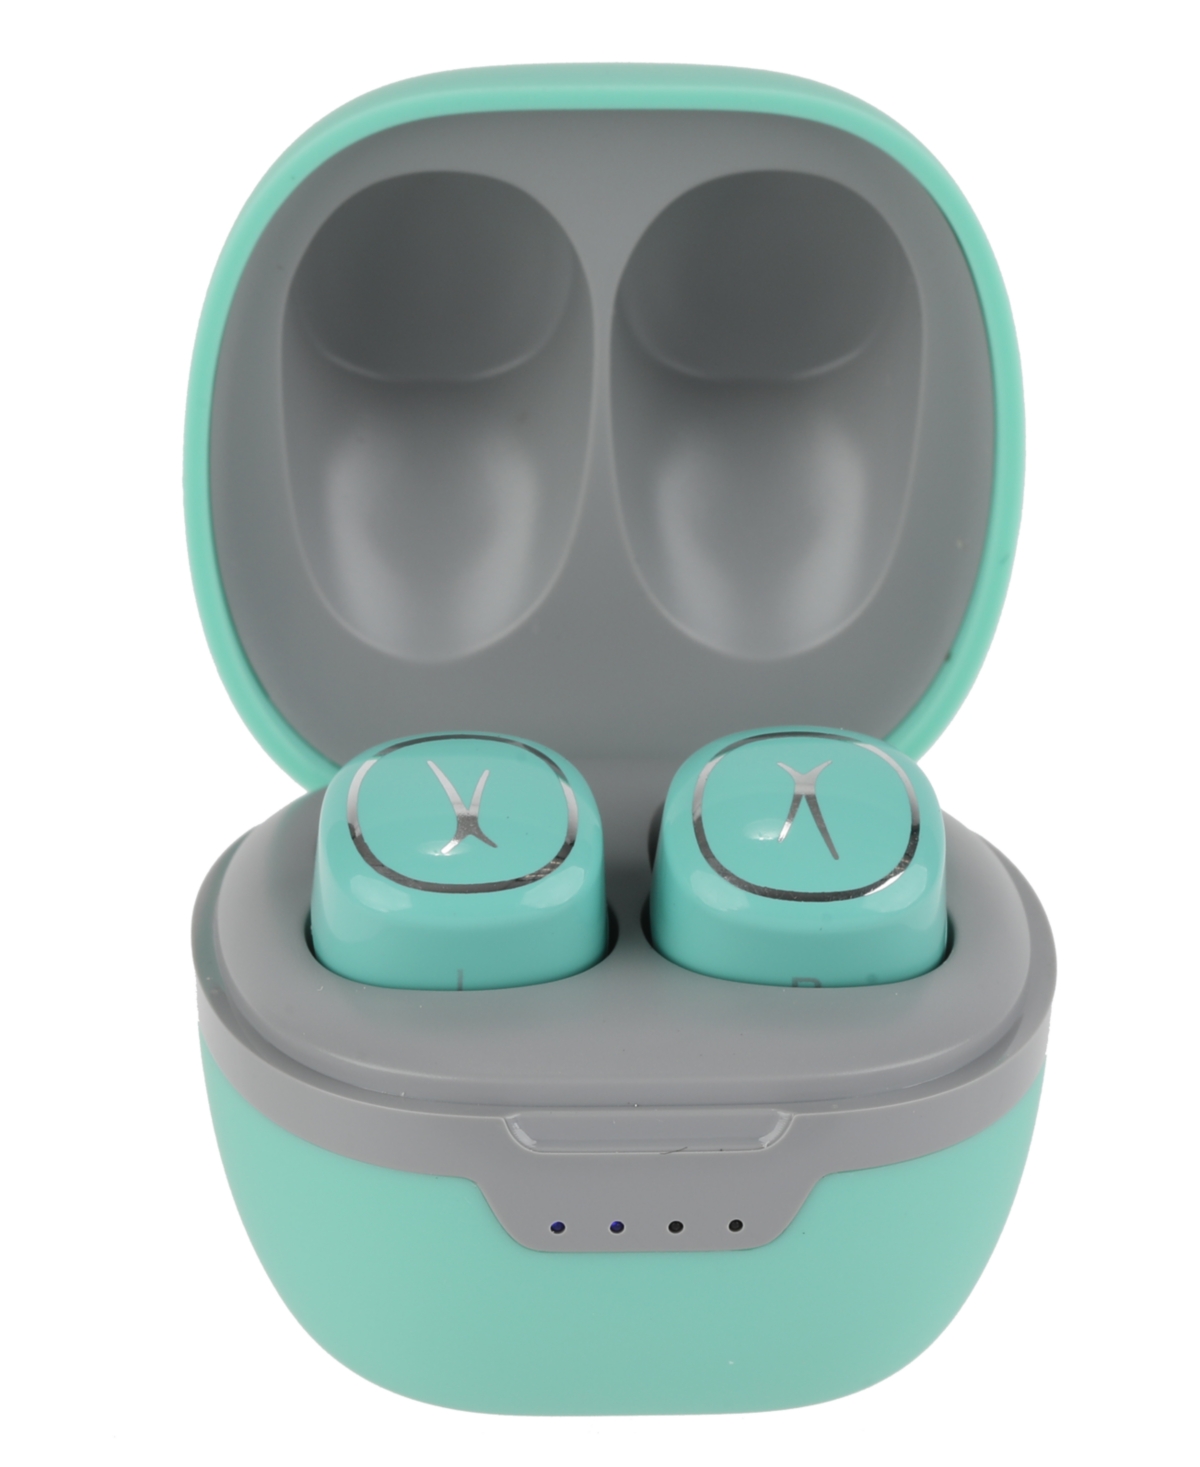 Altec Lansing Nanobud 2.0 True Wireless, Earbuds With Charging Case In Blue